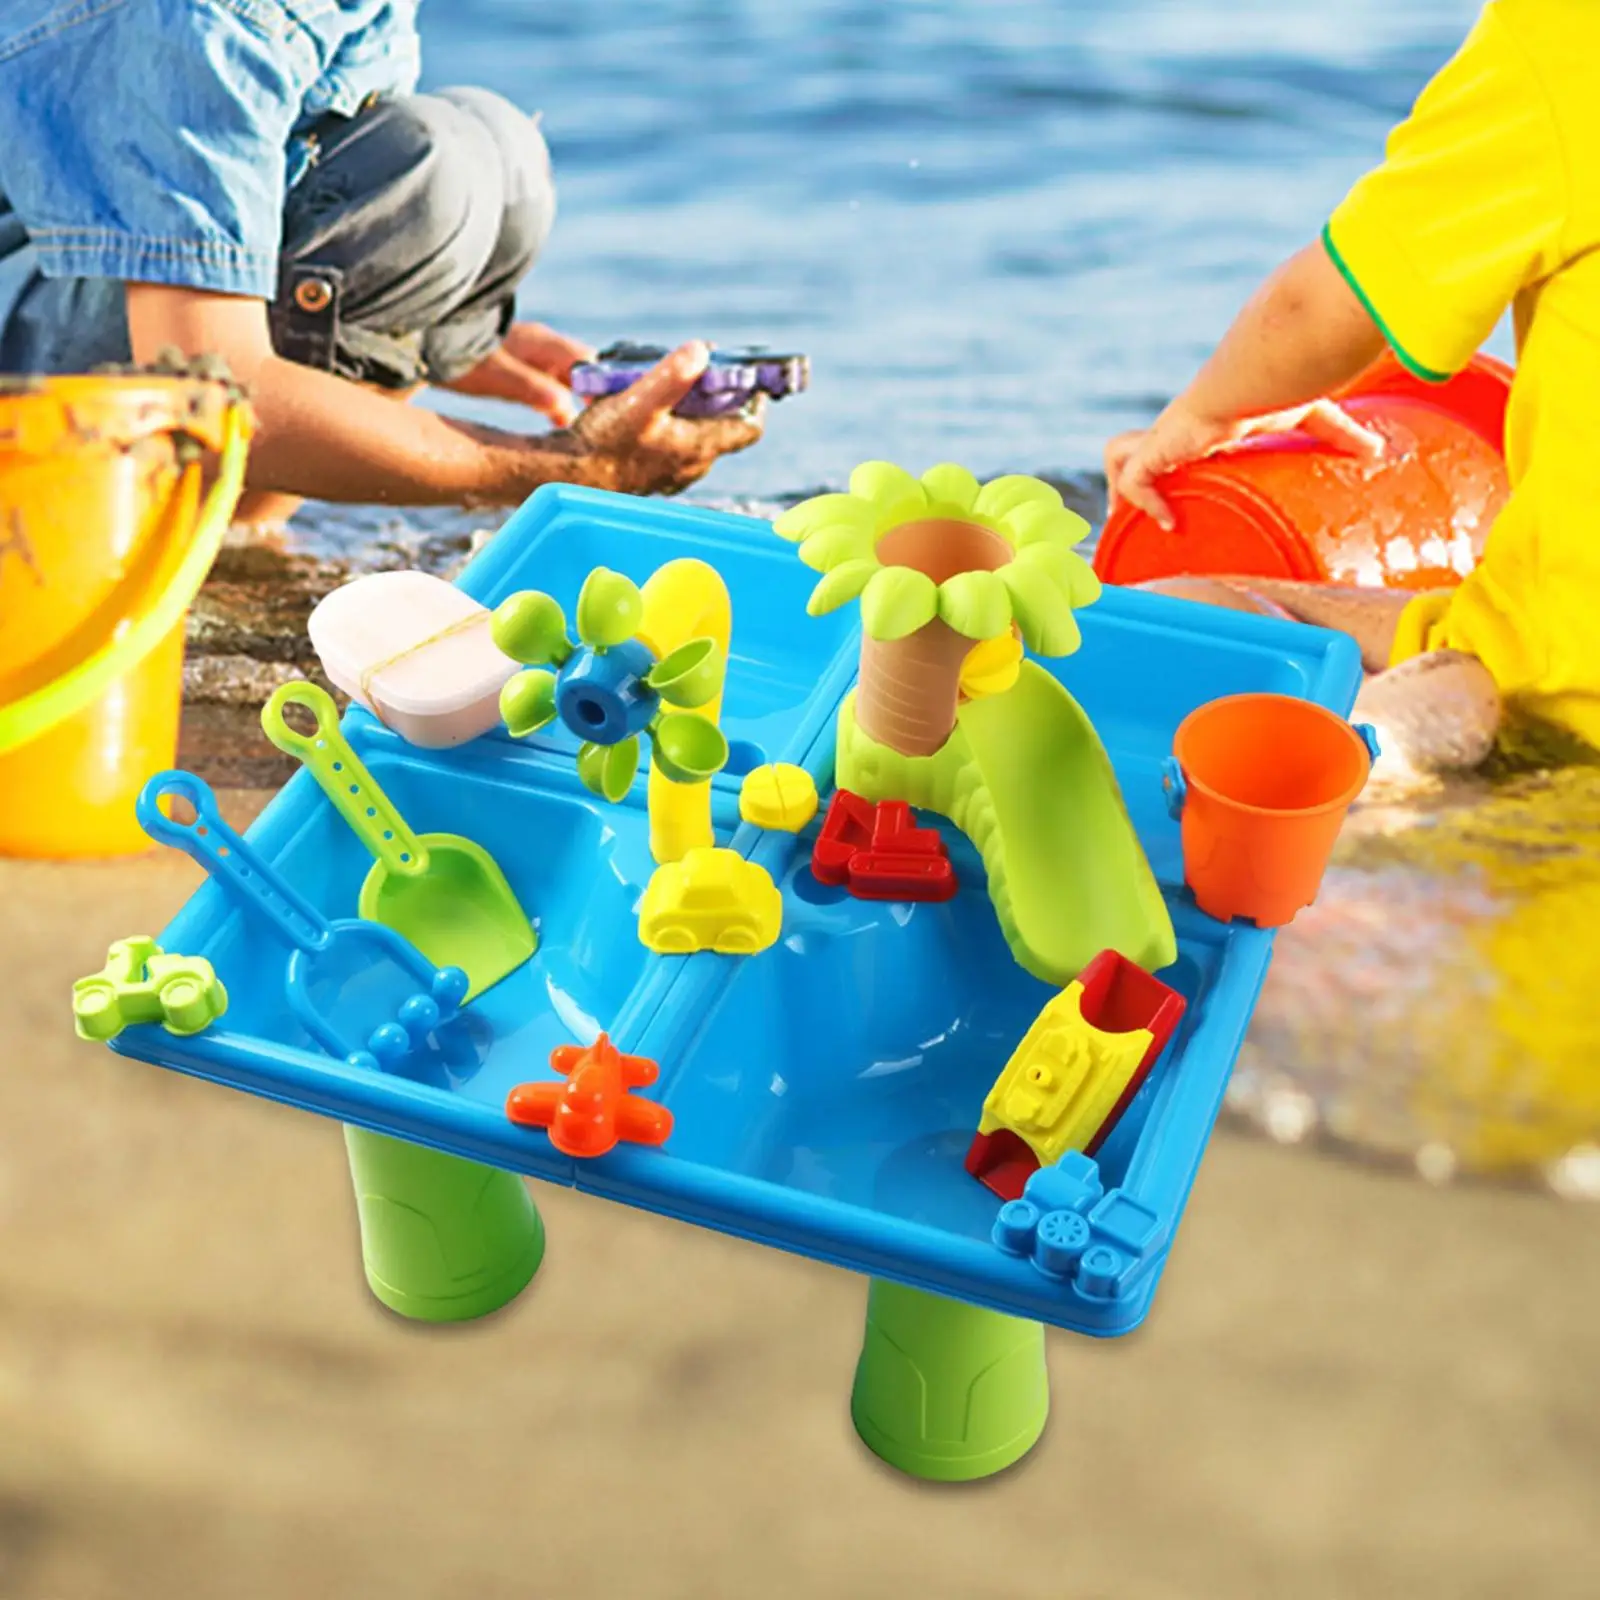 24 Pieces Summer Water Table Sensory Toys Interactive Social Play Sandbox Table Playset for Kids Girls Boys Birthday Gifts